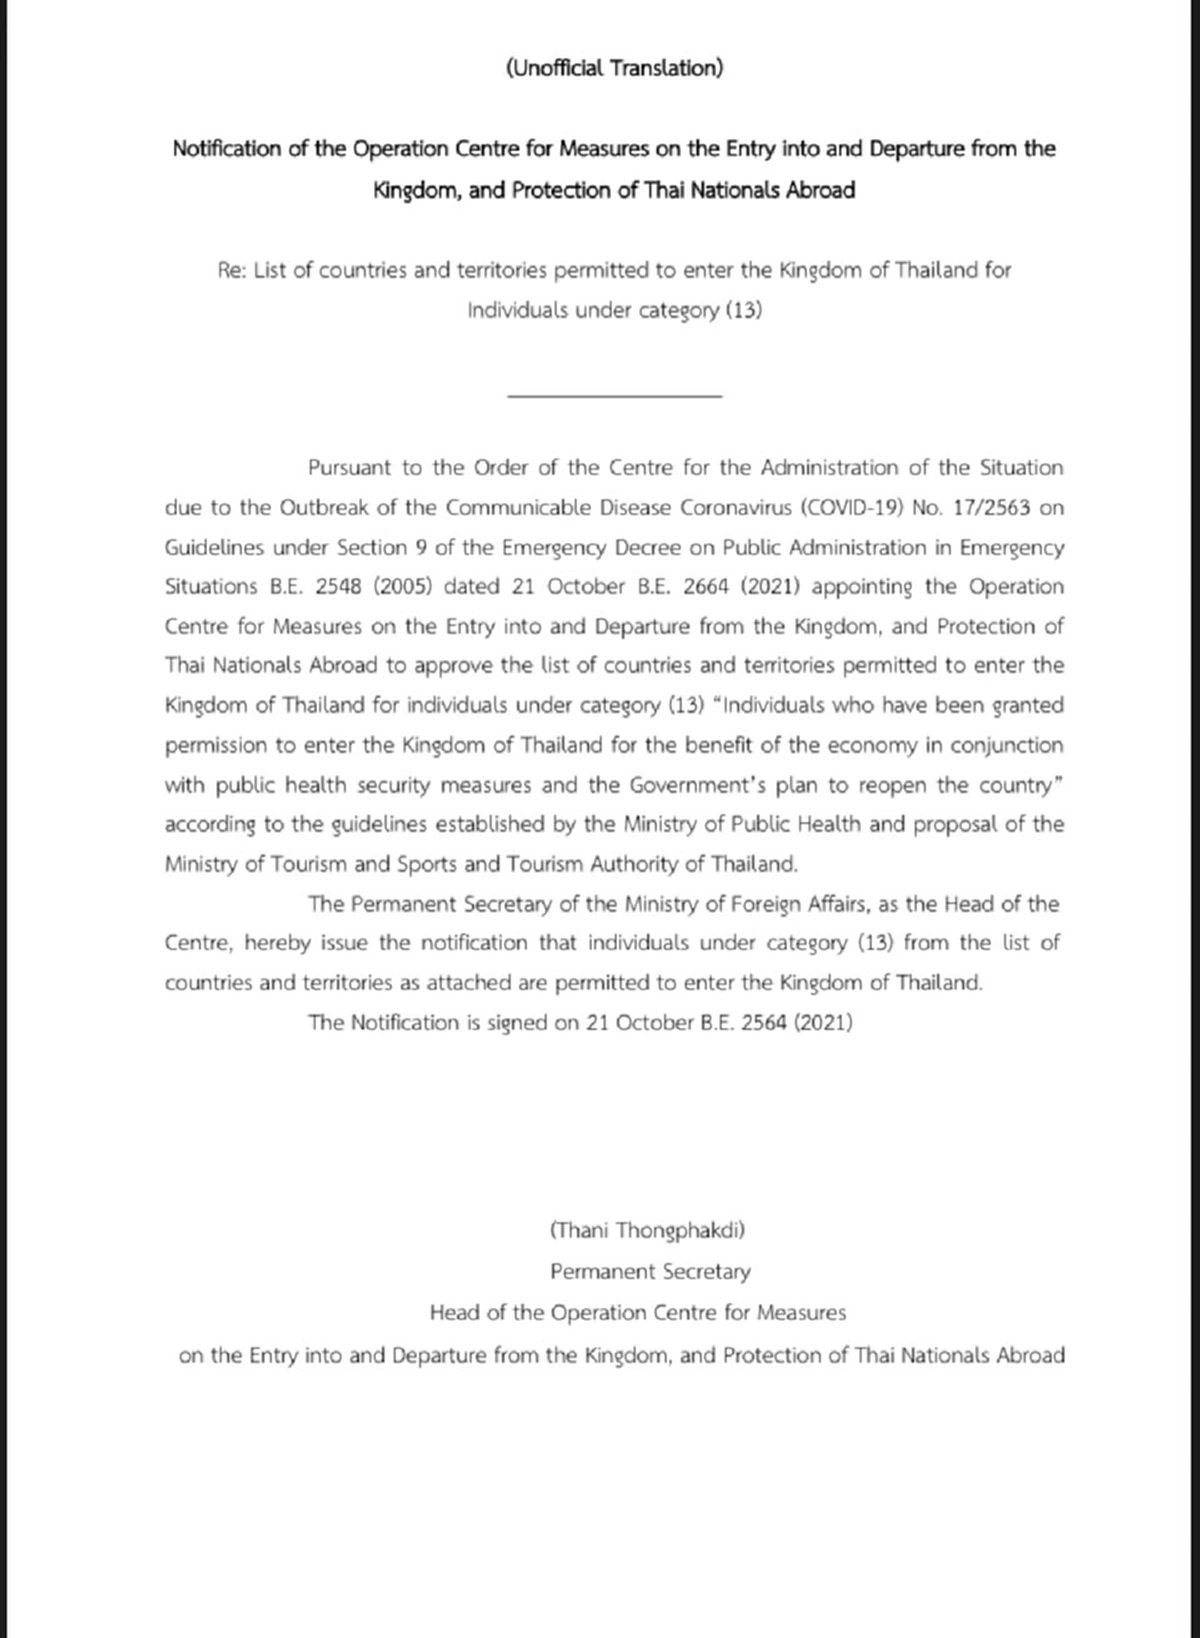 Notification of the Operation Center for Measures on the Entry into and Departure from Thailand